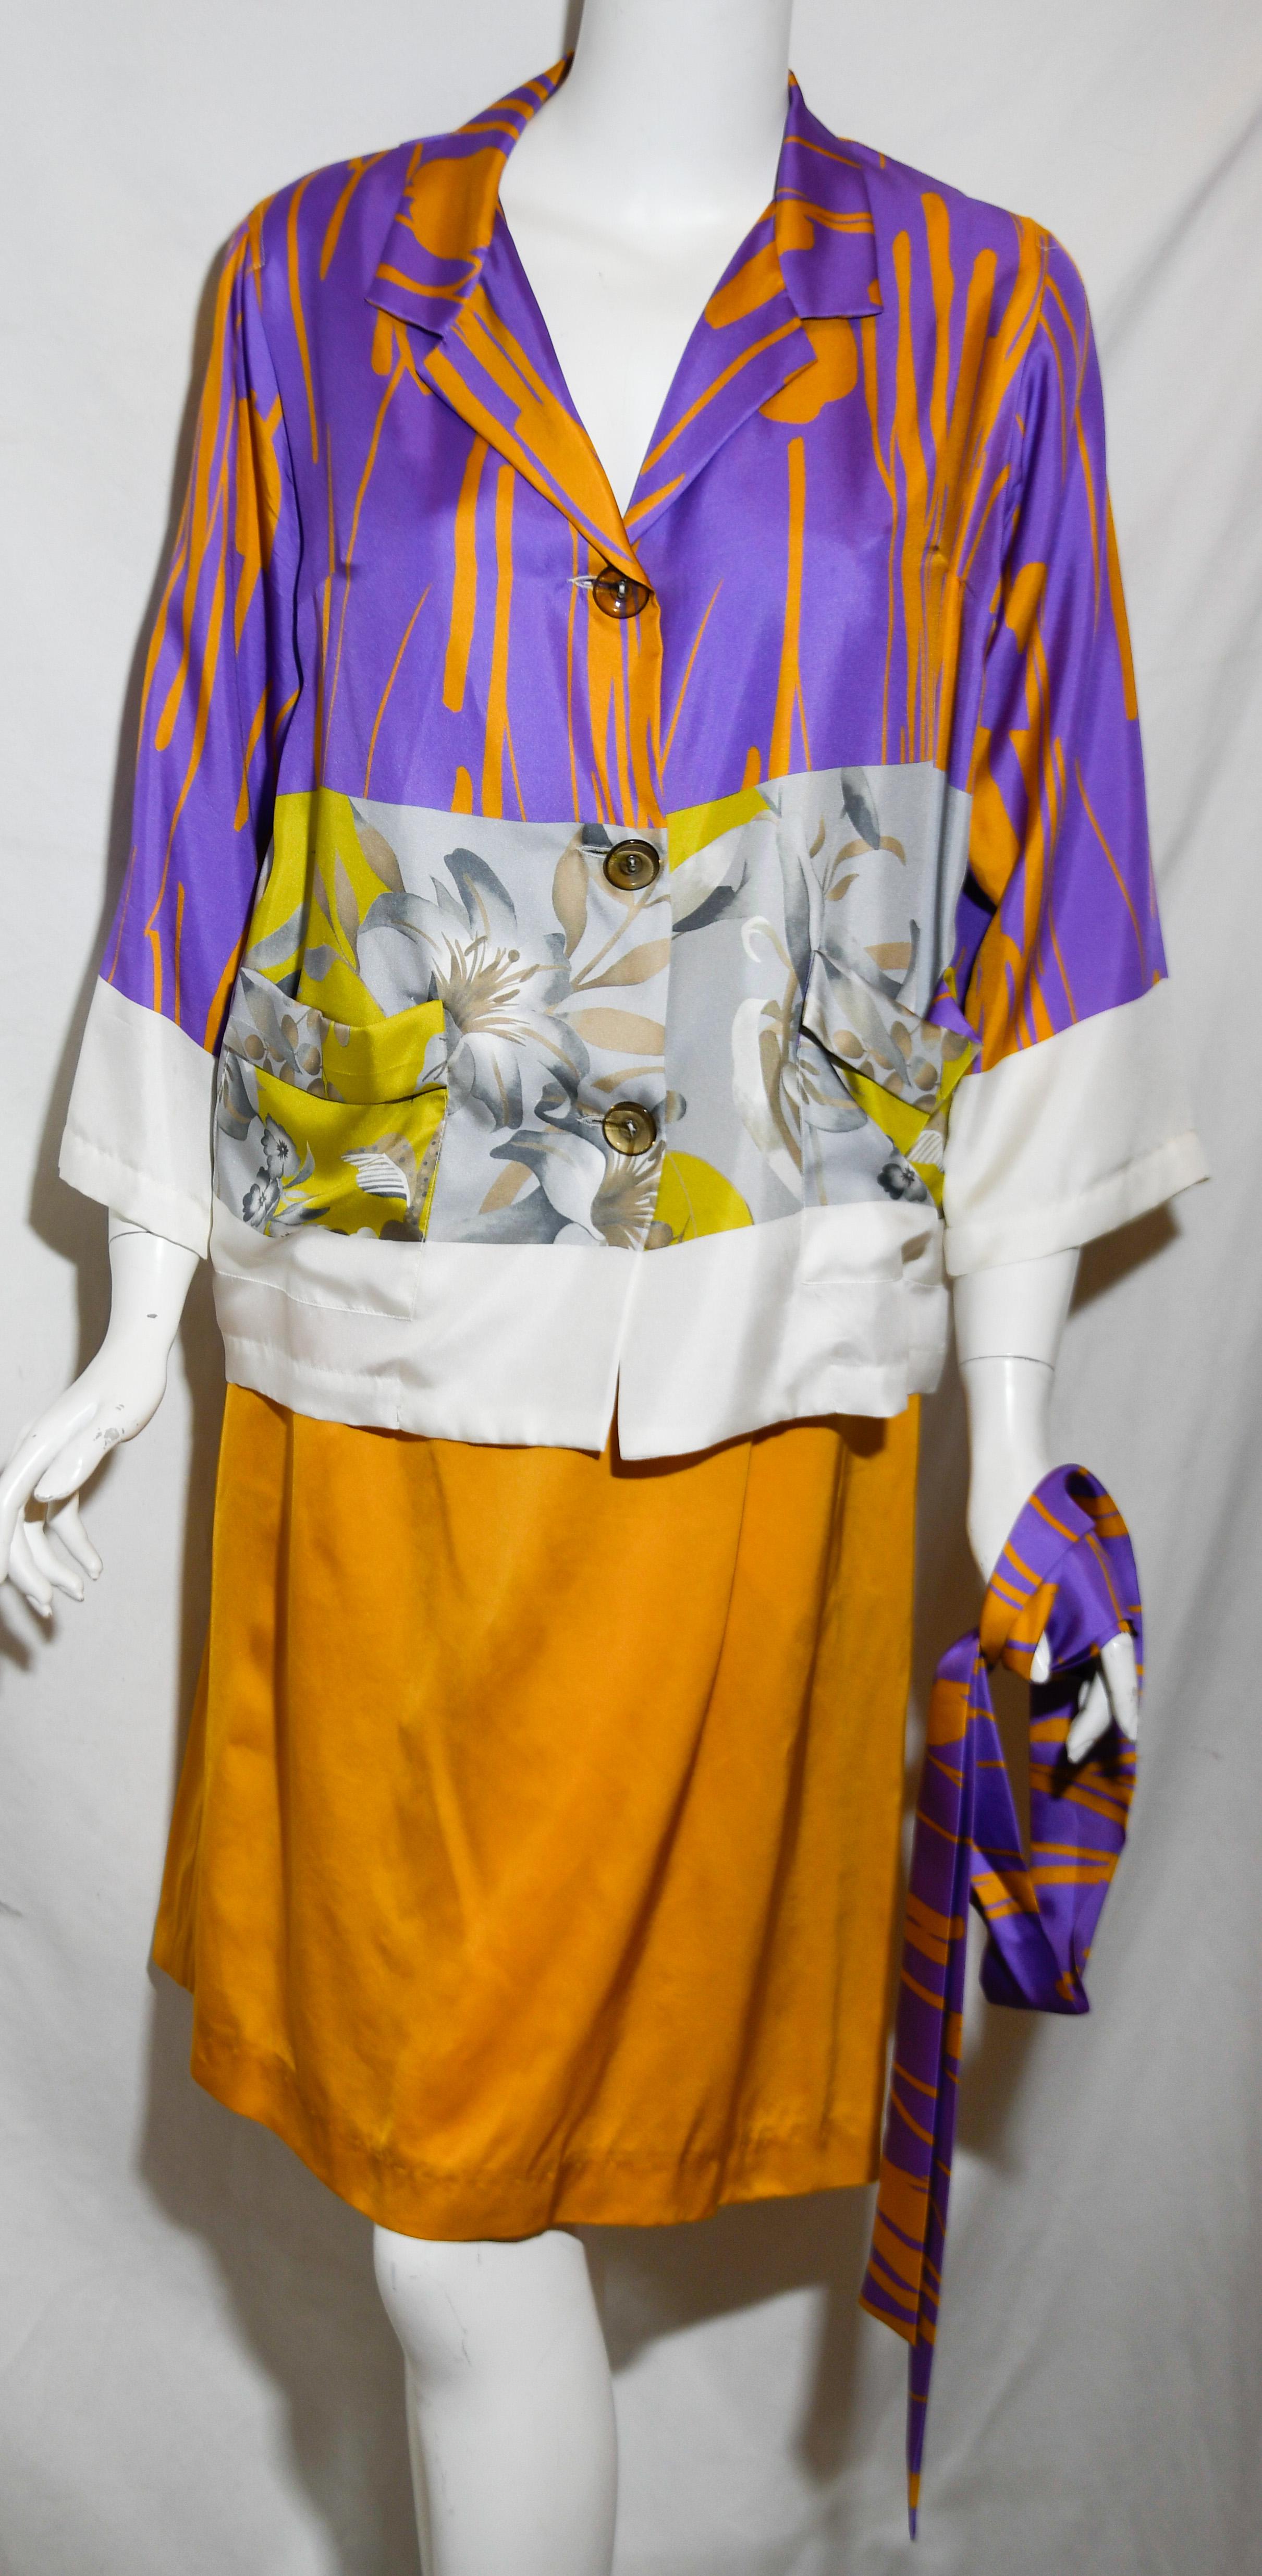 Dries Van Noten orange and purple silk short kimono style skirt suit incorporates purple and orange bold stripes transitioning to yellow and white floral print.  The jacket is tied at the waist by a sash, of same print and contains 3/4  sleeves 